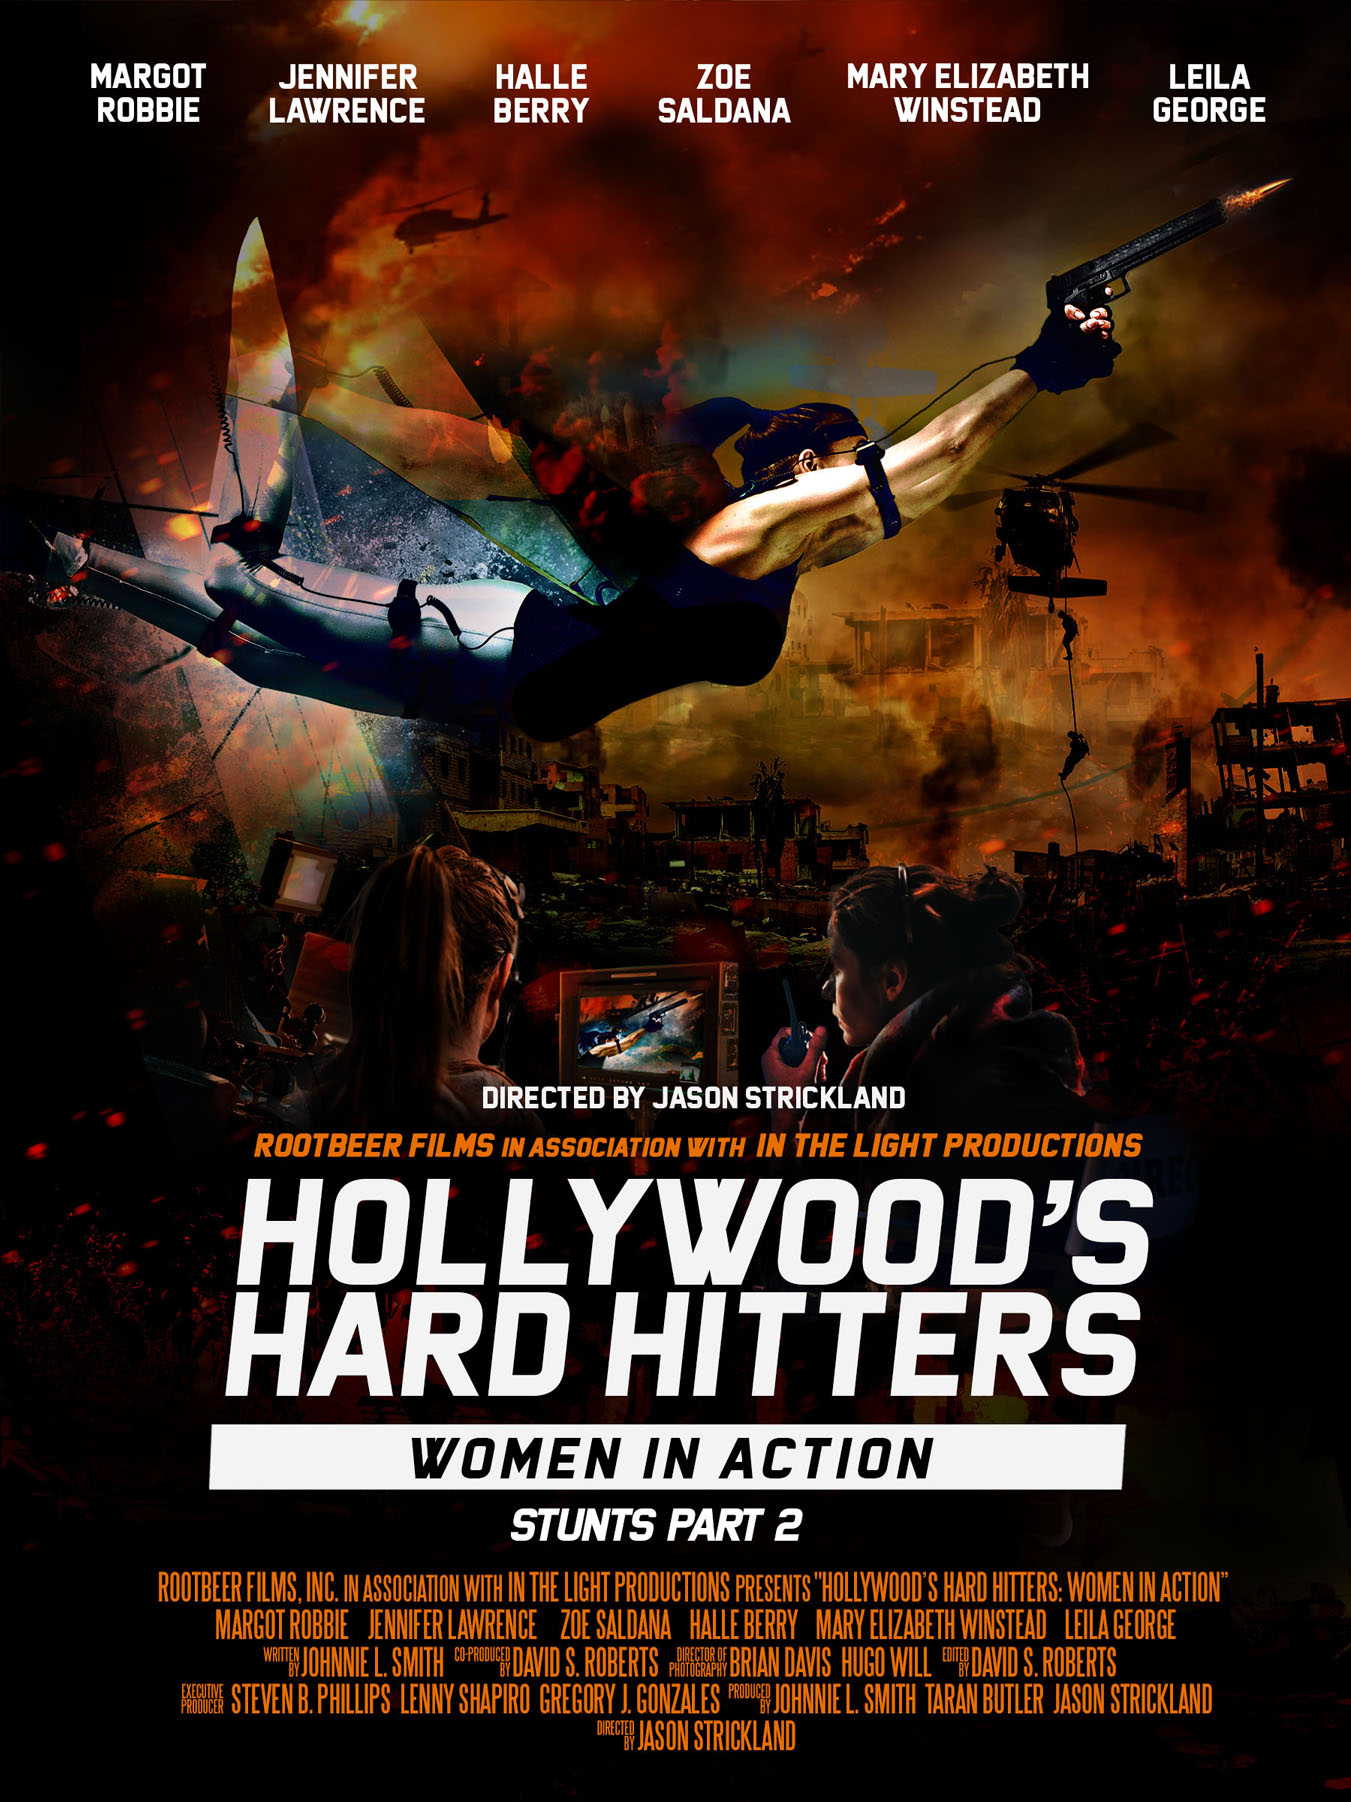 Hollywood's Hard Hitters: Women in Action